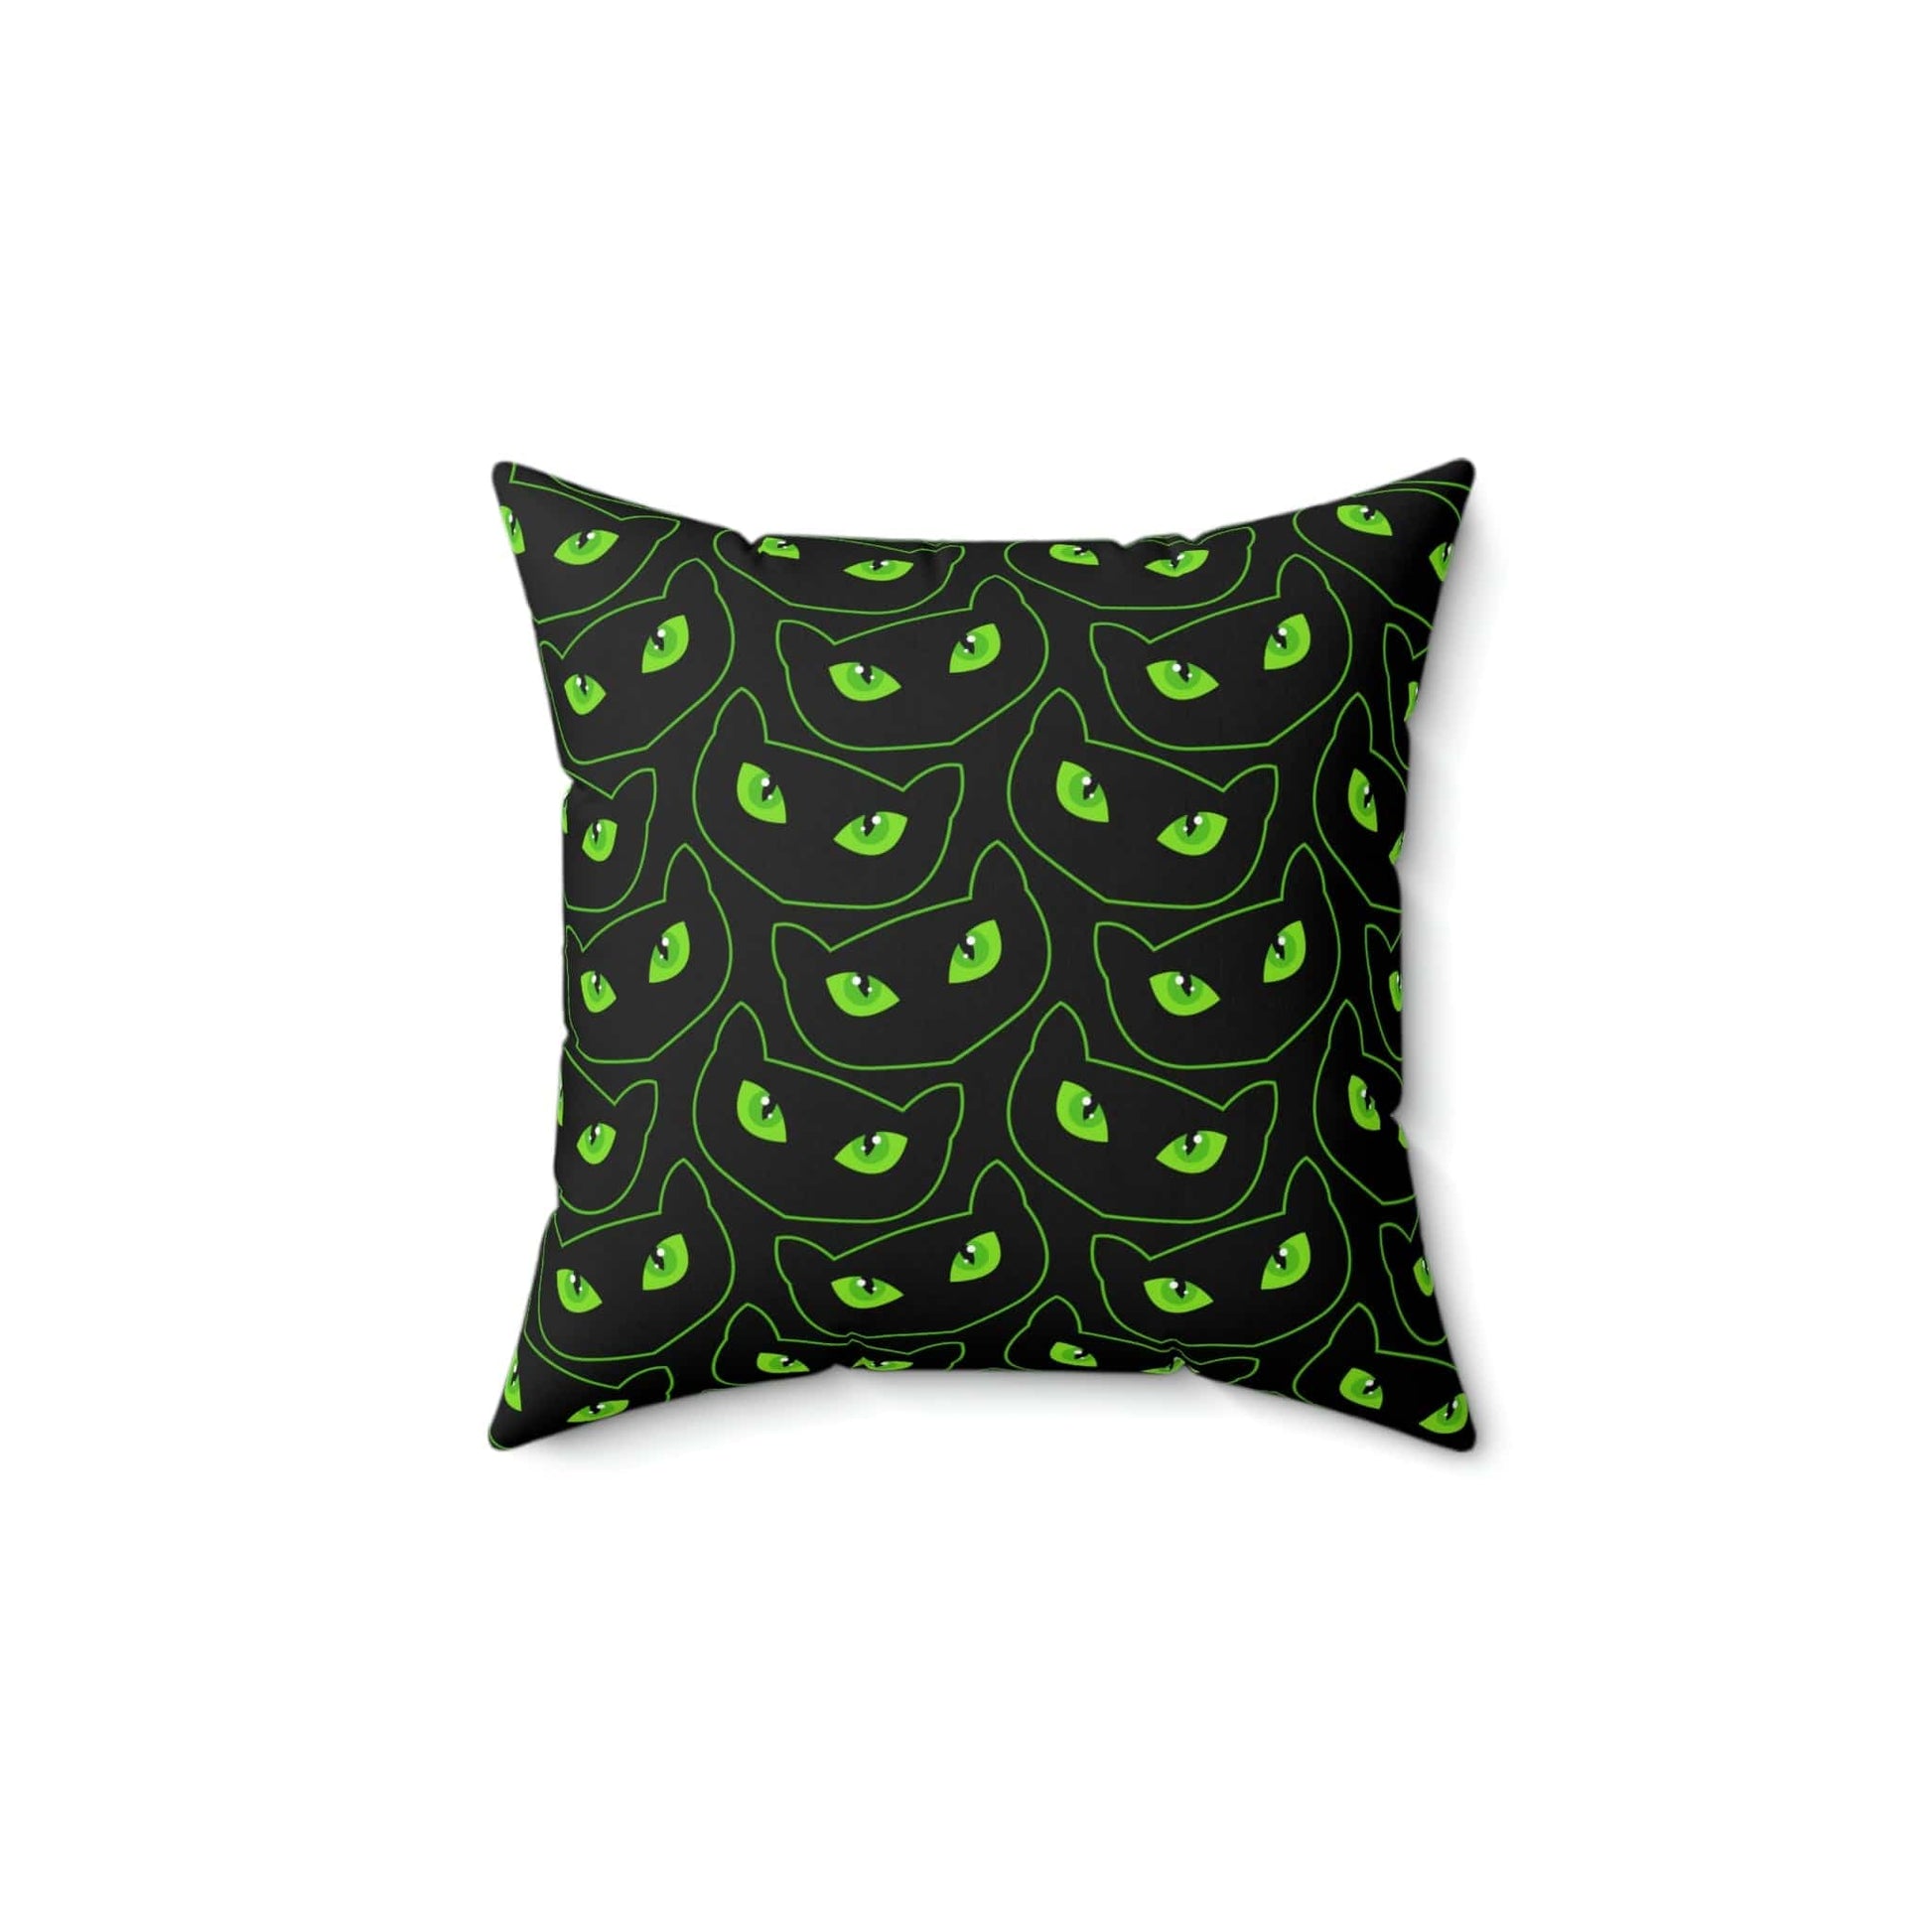 Kate McEnroe New York Halloween Pillow Cover, Spooky Cat Eyes Pillow Case Throw Pillow Covers 14" × 14" 3549431919